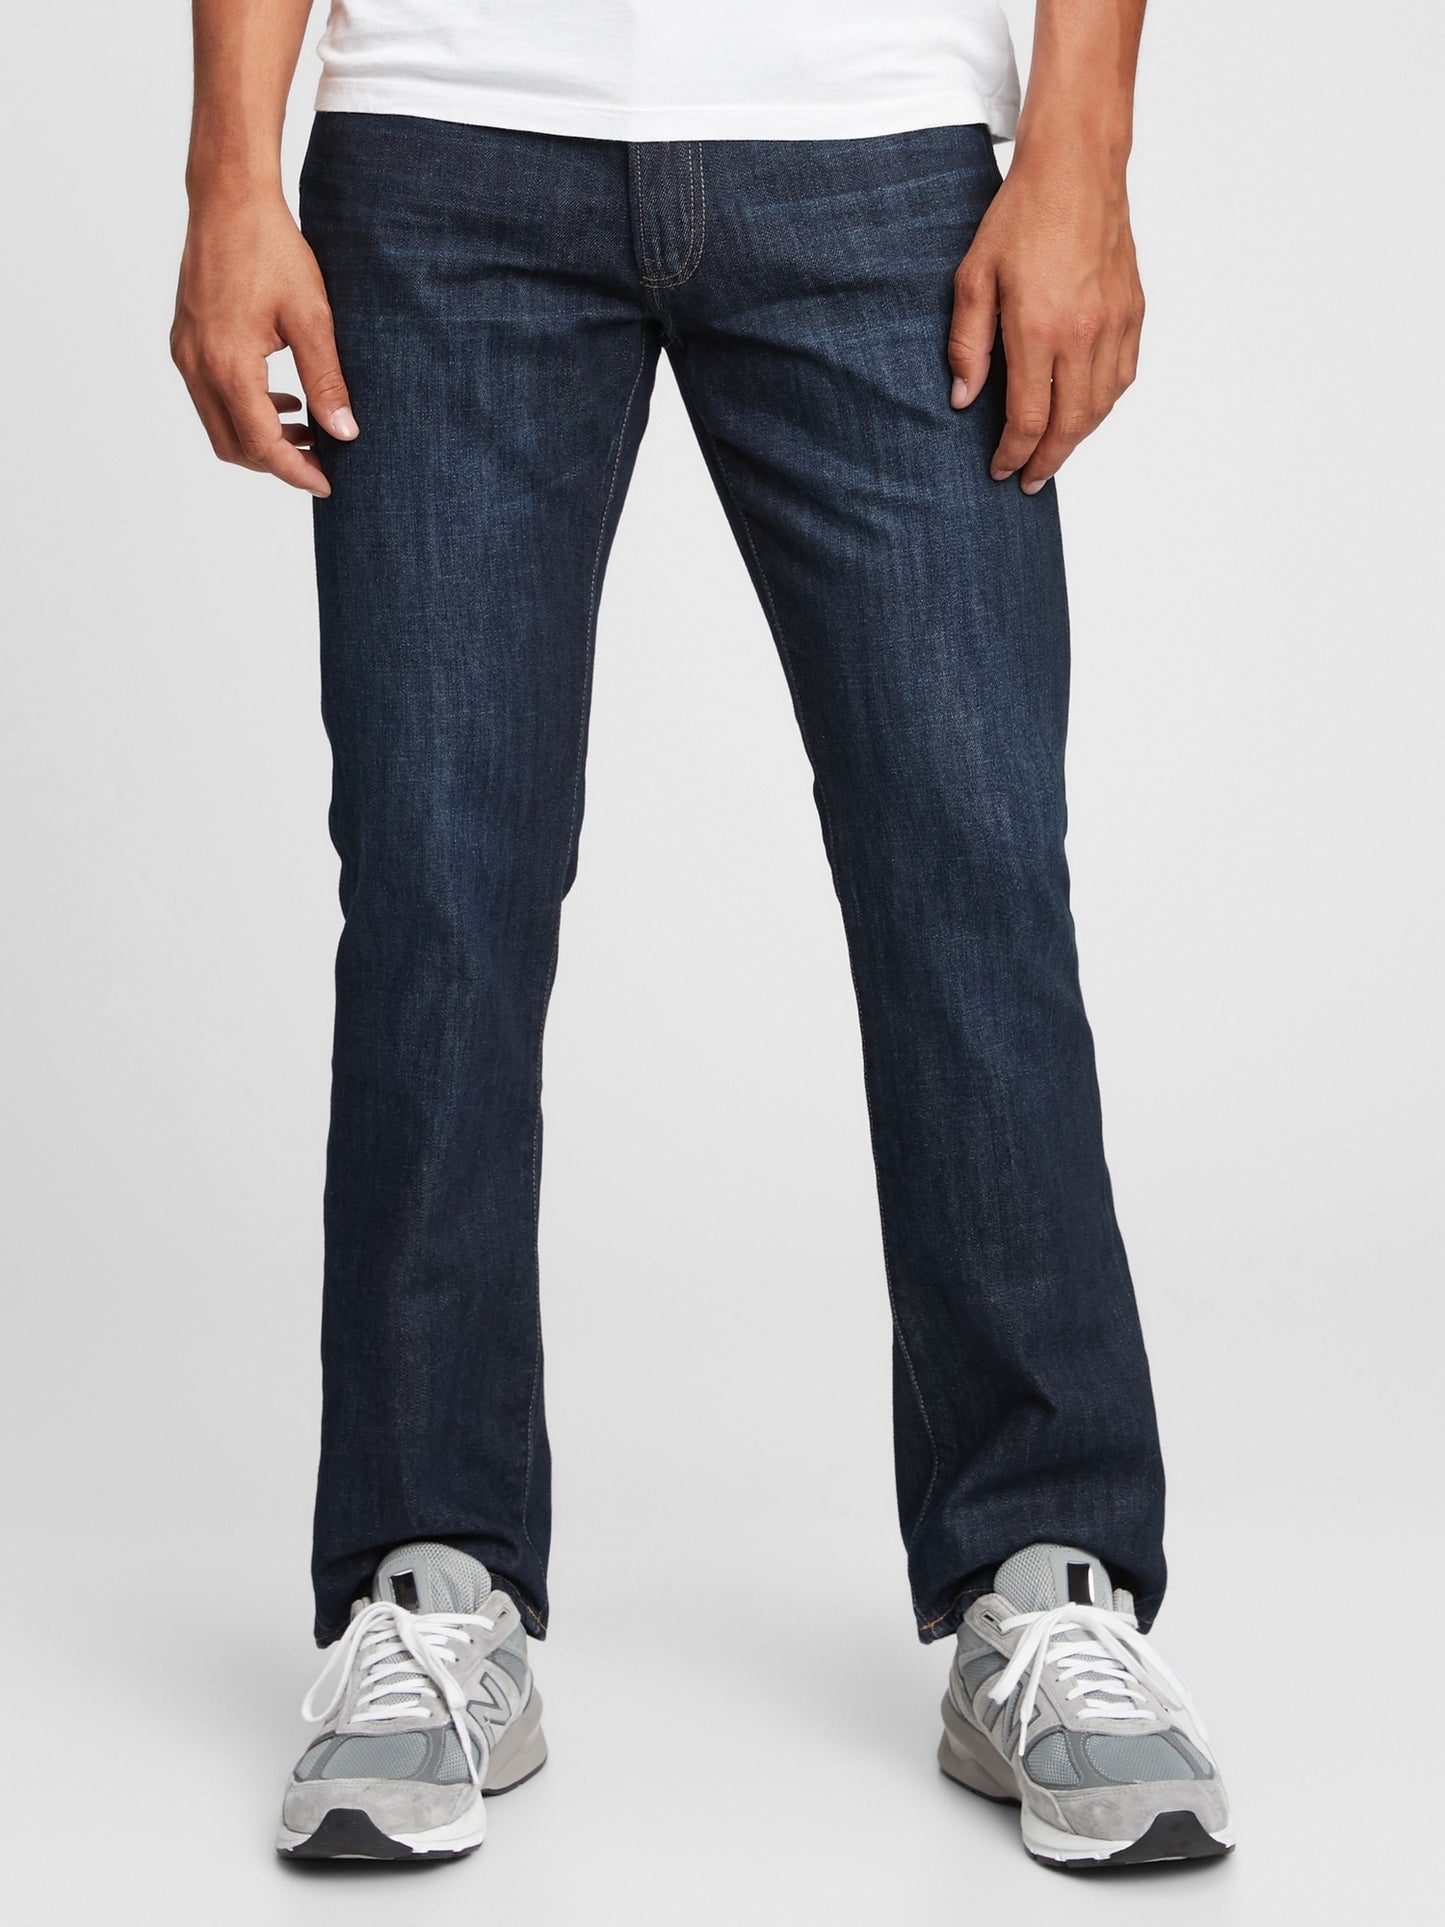 Gap Boot Jeans with Washwell